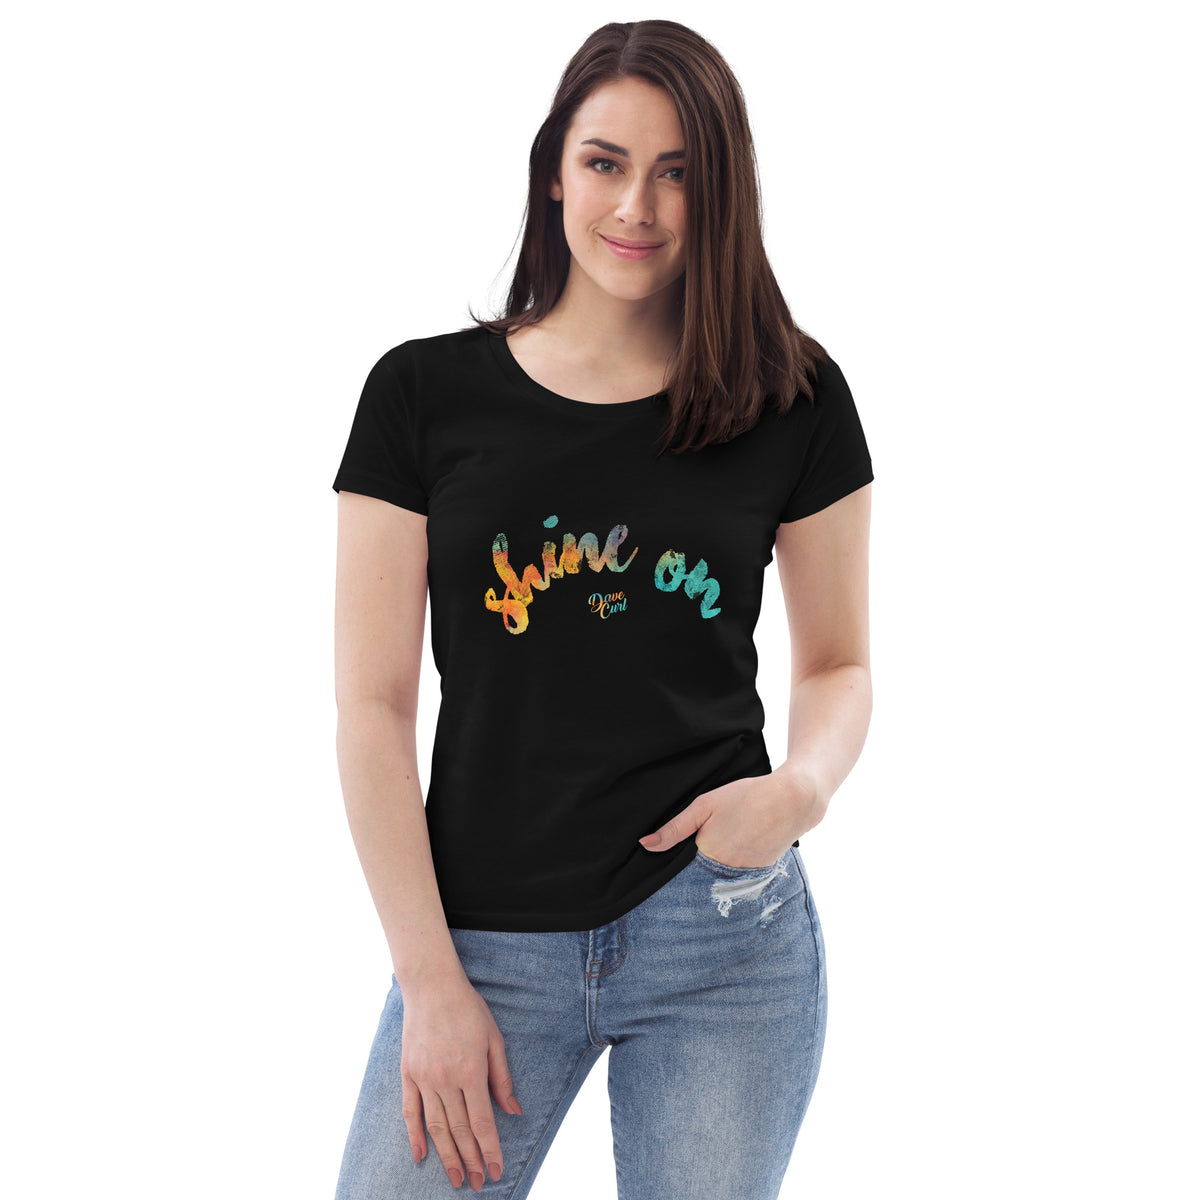 Women's Short Sleeve T-shirt | Fitted Eco Tee – Dave Curl